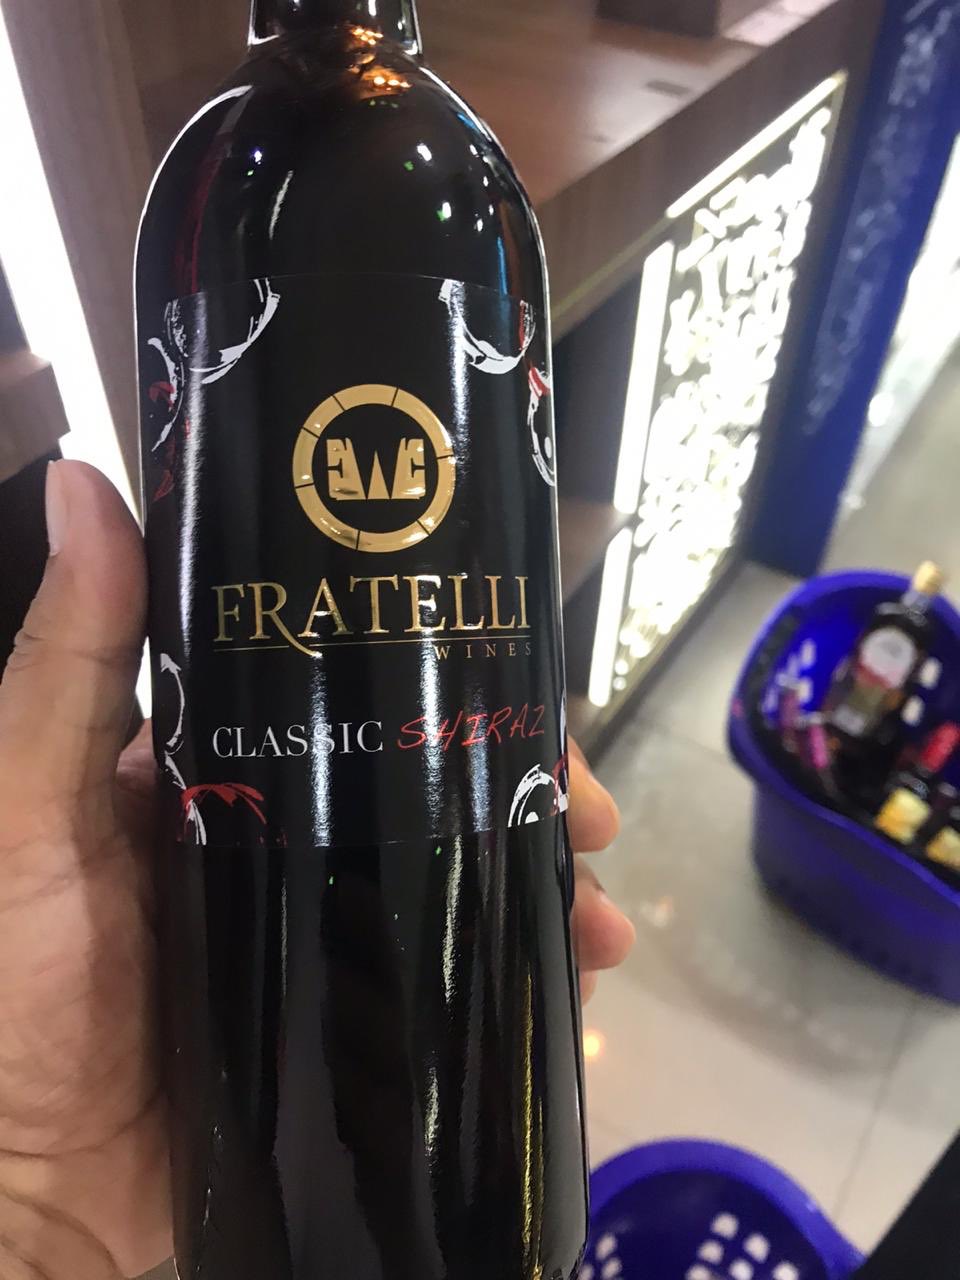 Harish Puri On Twitter Made A Trip To The Csd Canteen After 4 Months Stocked Up On My Daaru Guys Fratelli Wines Are Now Available In The Csd Https T Co Ocgati2cy9